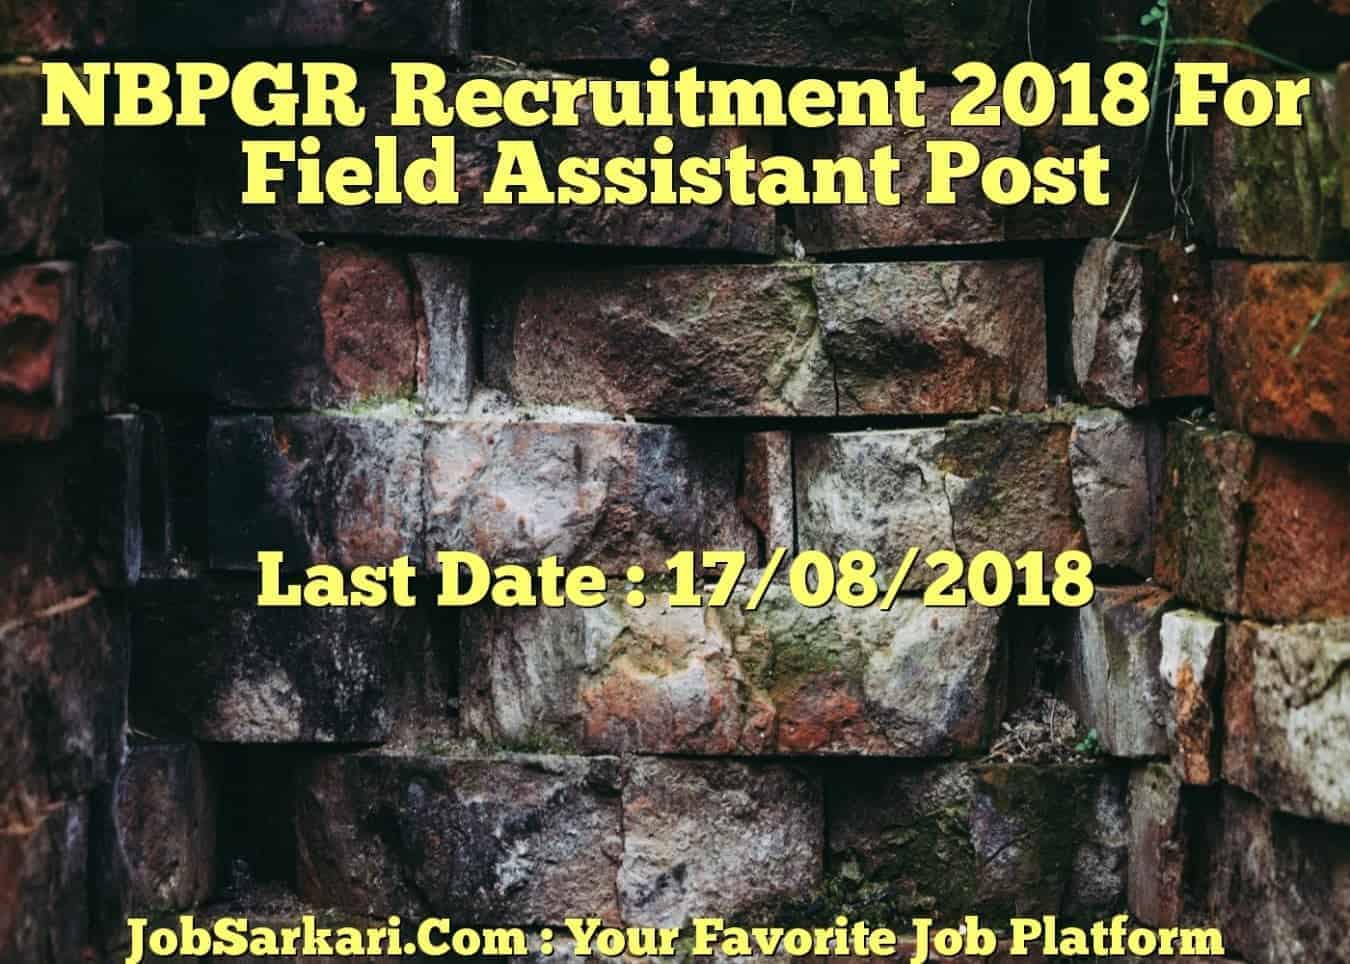 NBPGR Recruitment 2018 For Field Assistant Post